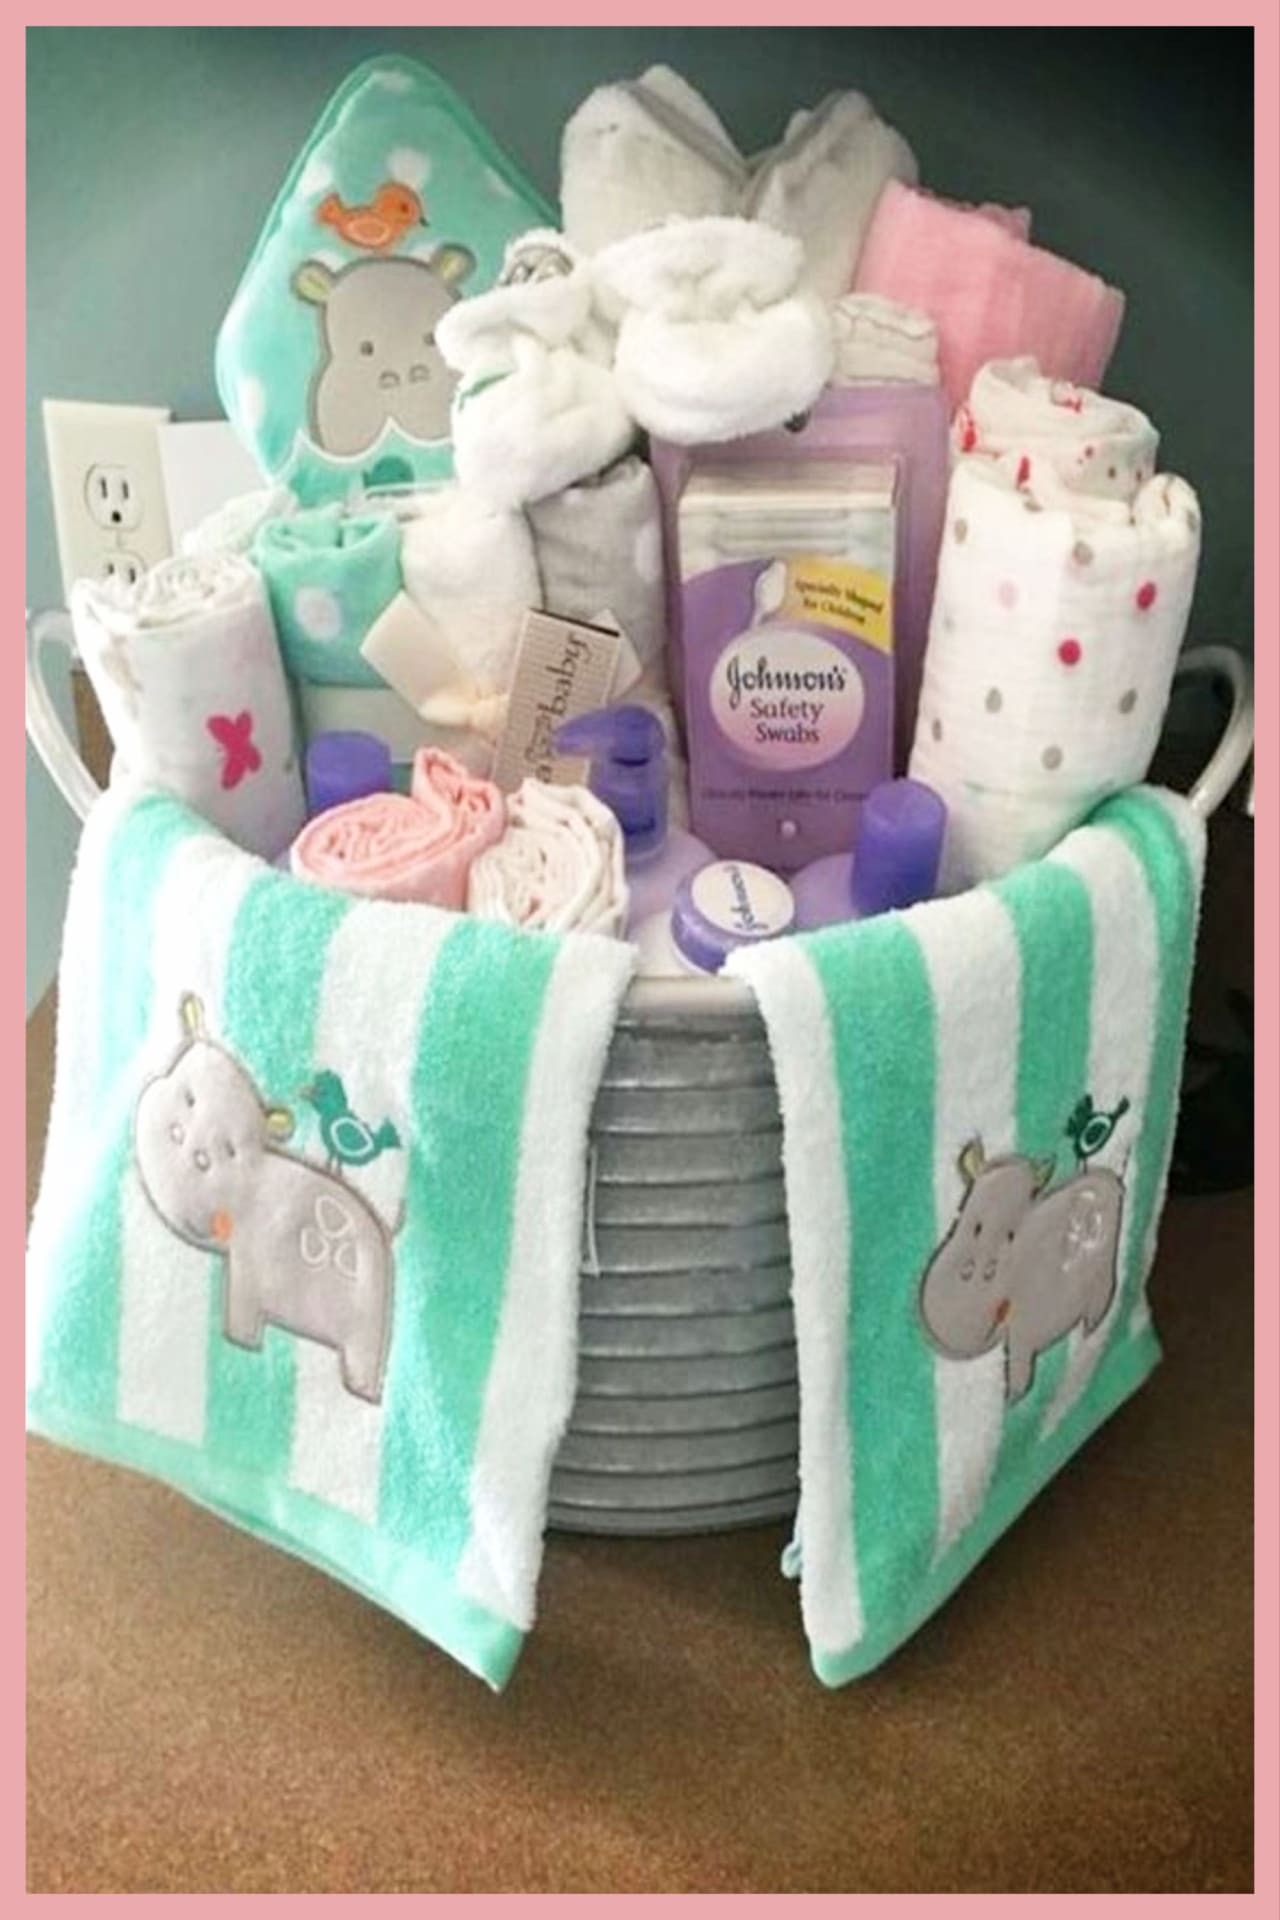 Baby shower gift basket ideas - unique and easy DIY baby shower gift ideas for unknown gender